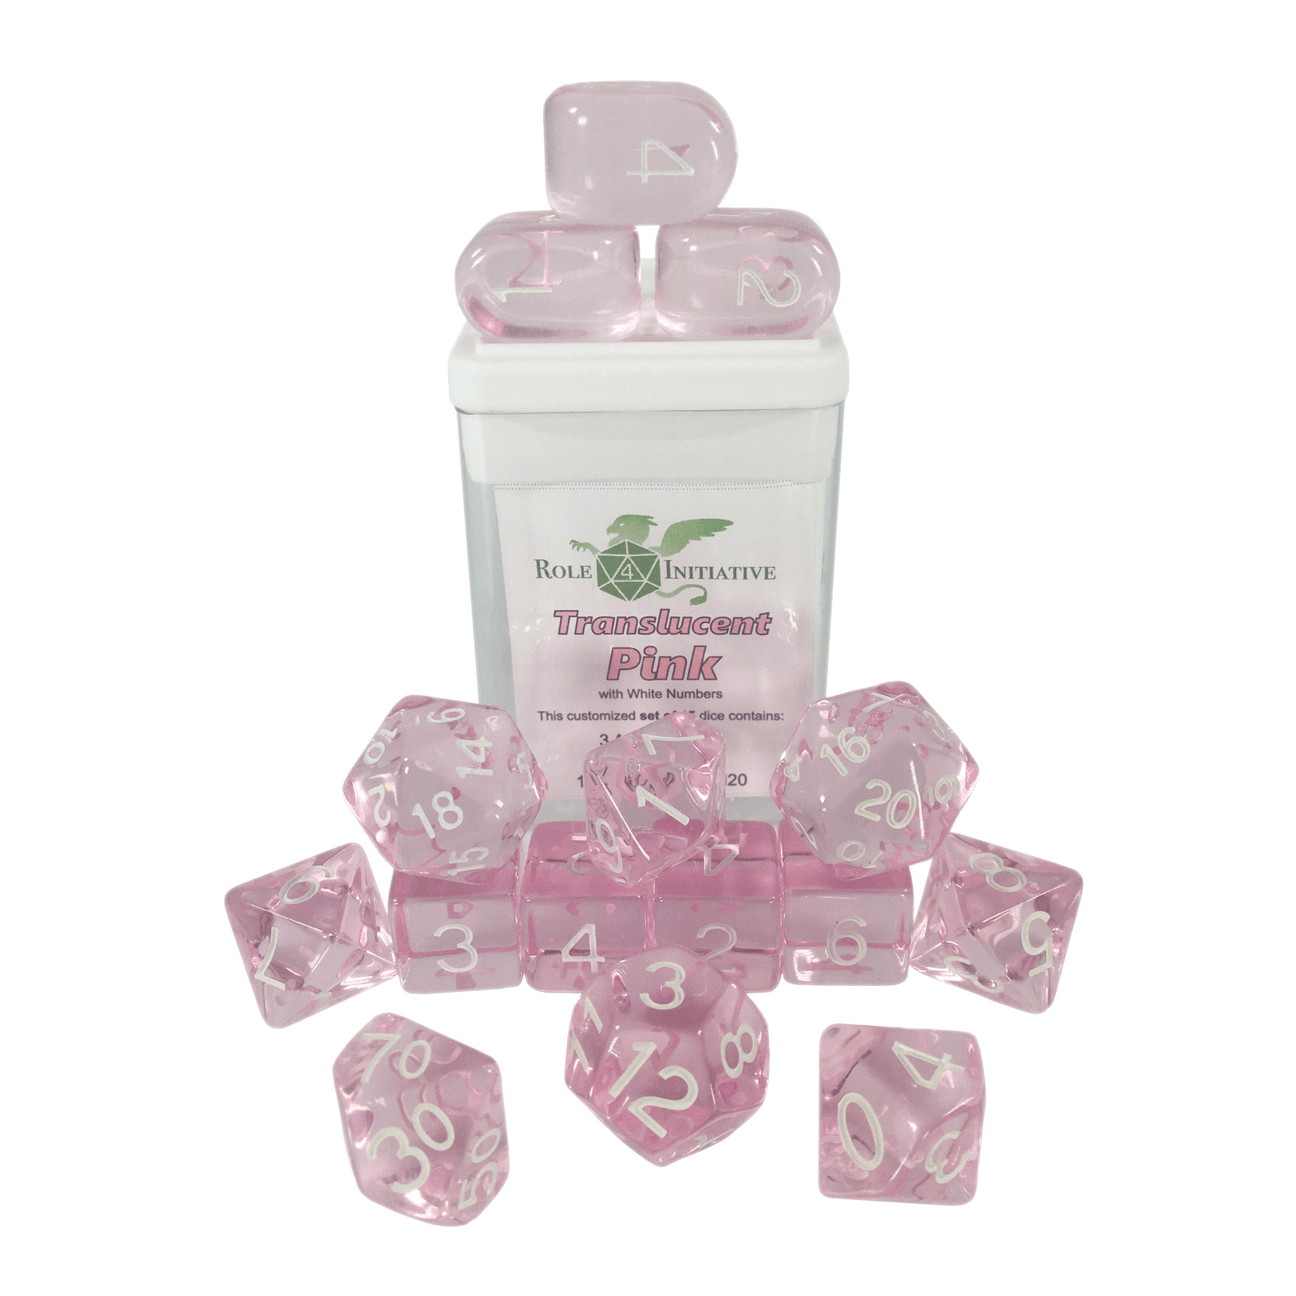 Translucent Pink - 15 dice set (with Arch’d4™) - The Fourth Place